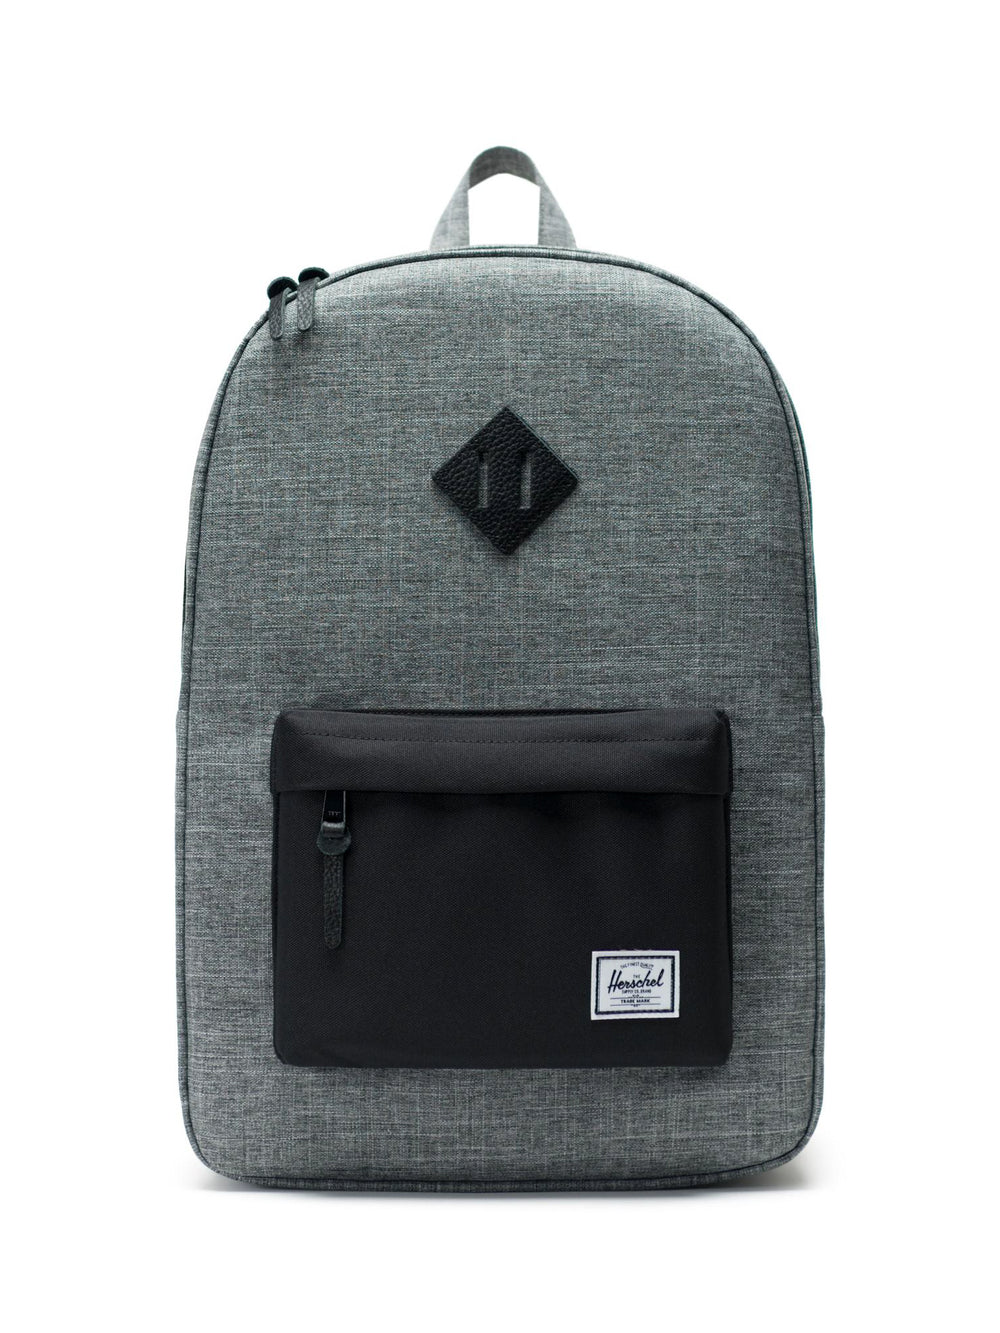 HERSCHEL SUPPLY CO. HERITAGE 21.5L BACKPACK - RAVEN X - CLEARANCE